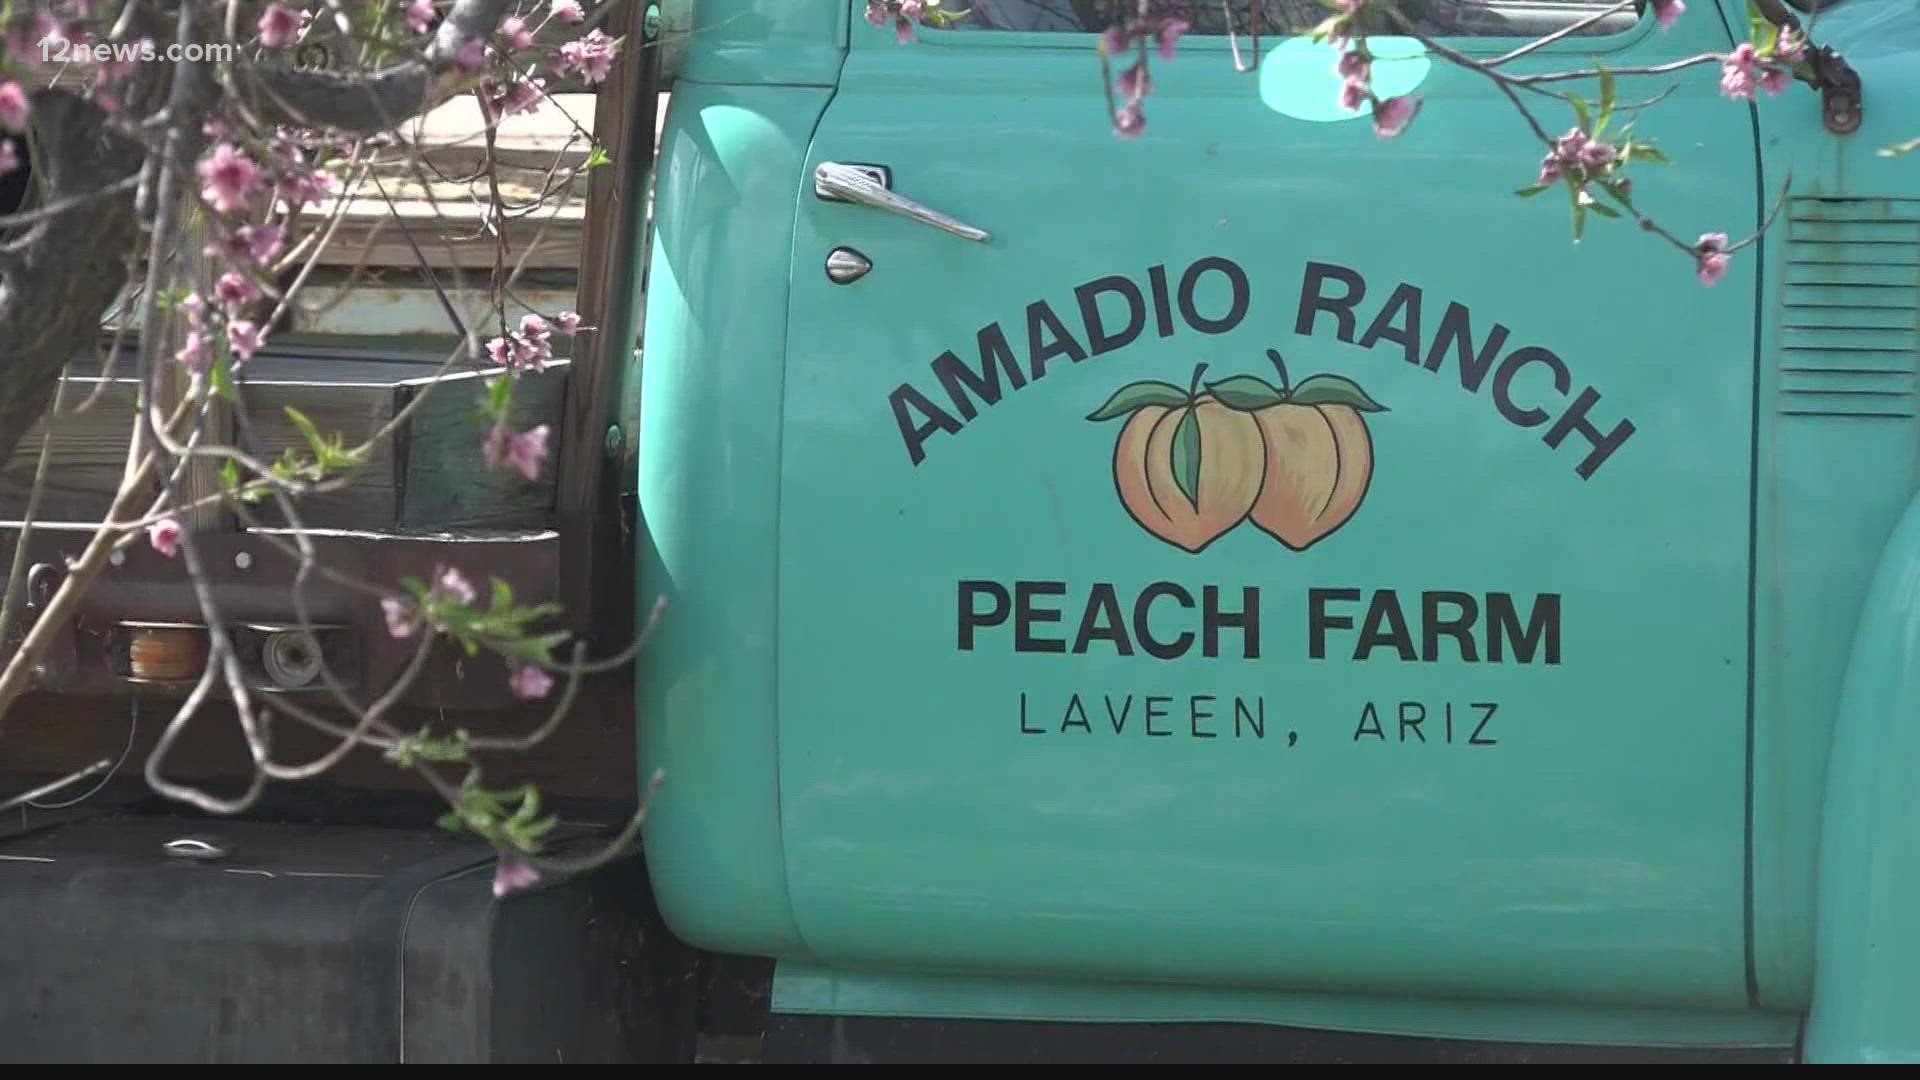 Arizonans are feeling the weight of rising gas prices and inflation. A local farm, Amadio Ranch, is having to increase prices to deal with the extra costs.